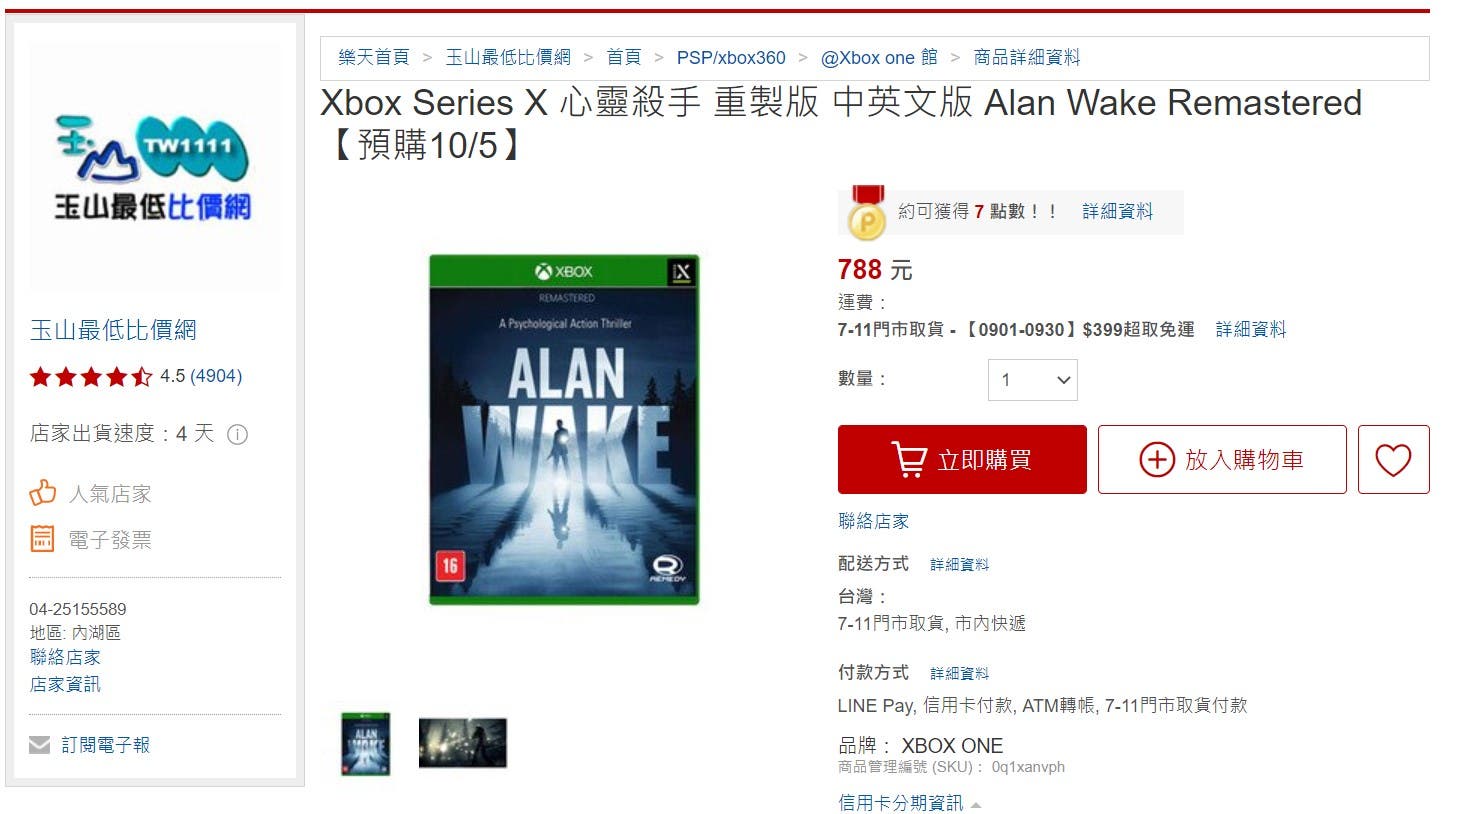   Alan Wake Remastered spotted on several sites, released in October!  |  Xbox One

